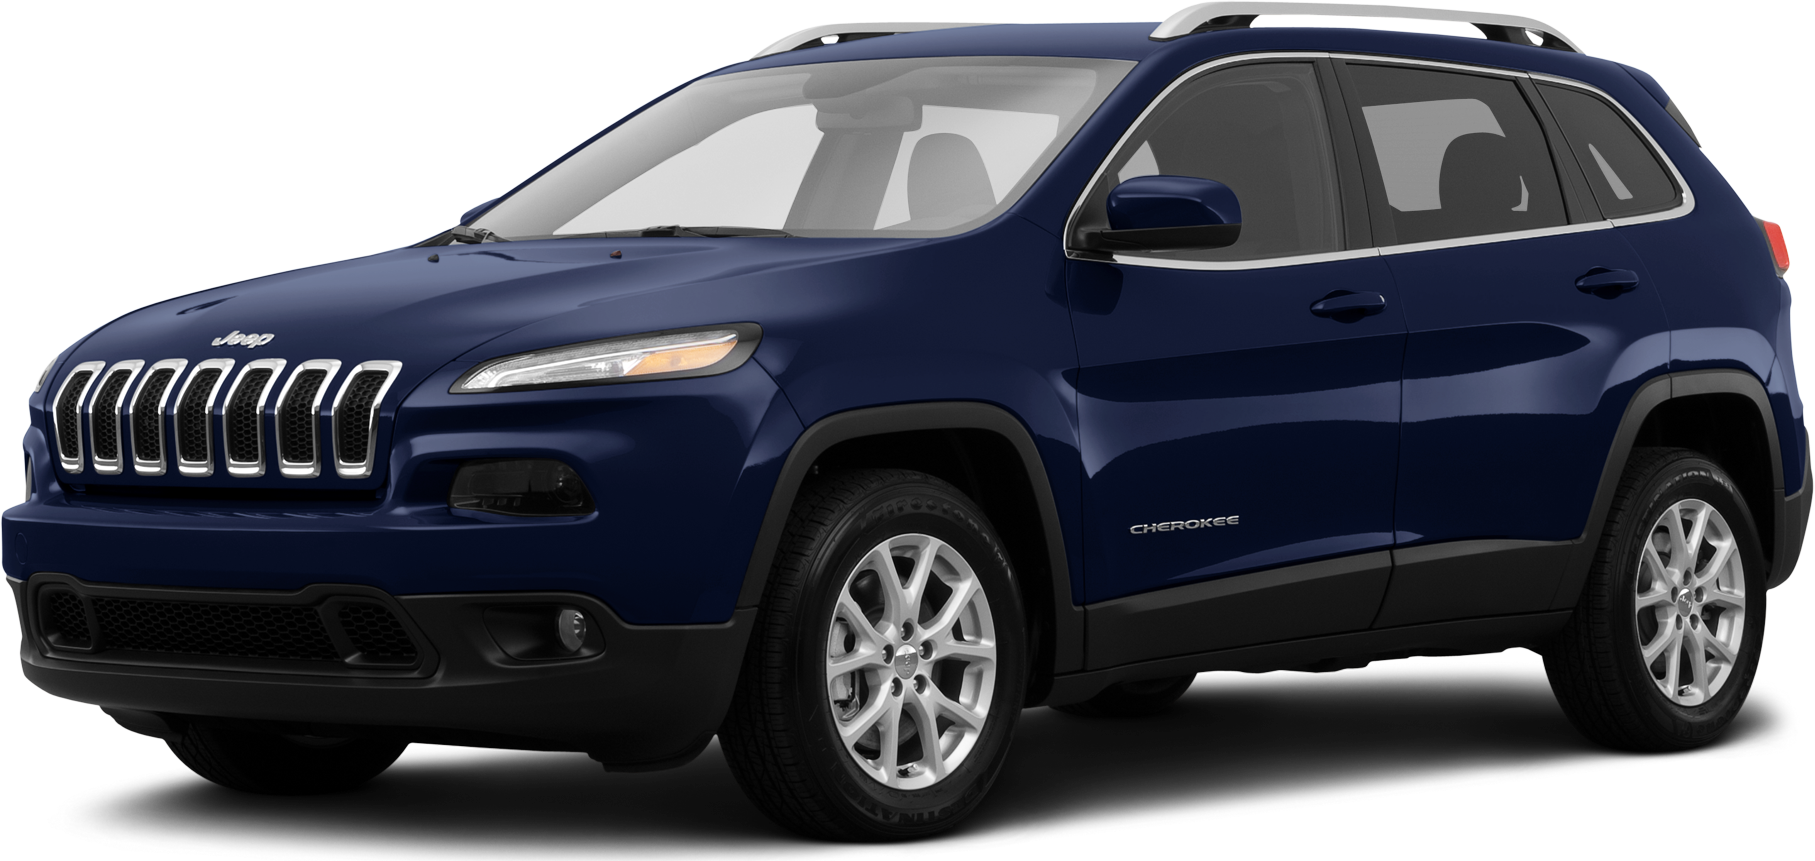 14 Jeep Cherokee Price Kbb Value Cars For Sale Kelley Blue Book